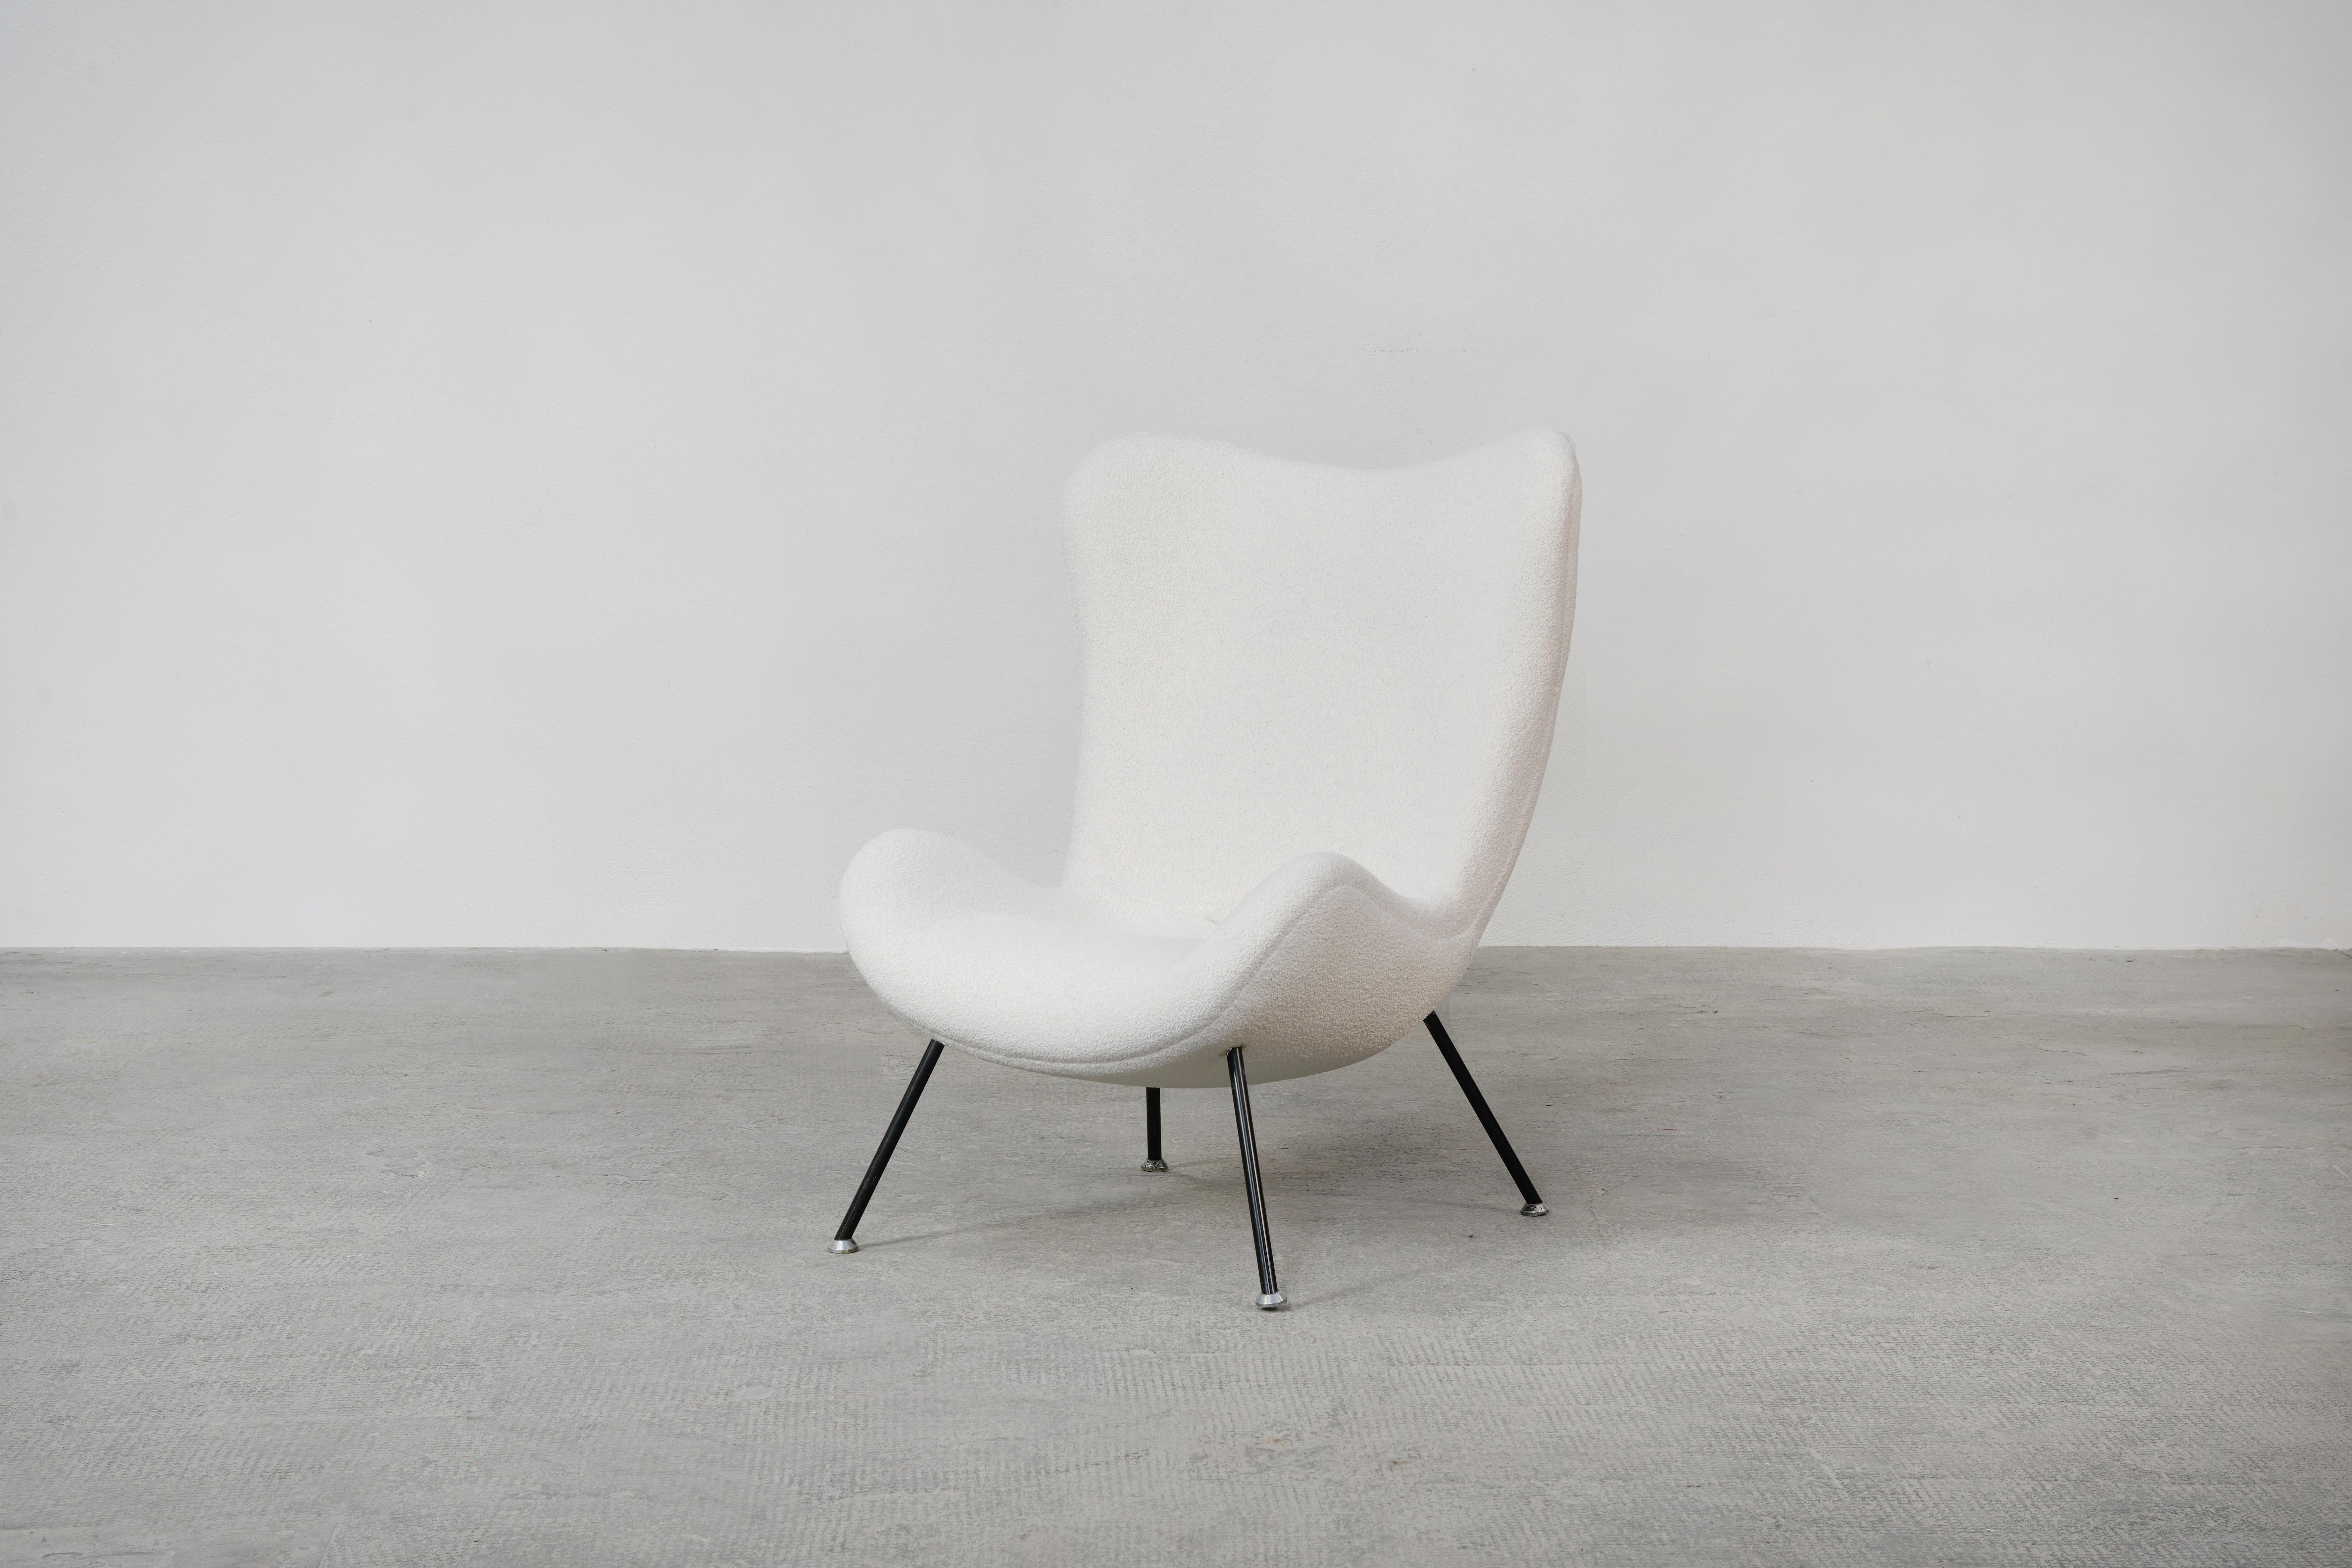 Lounge chair, new upholstery, high-quality white creme boucle, designed by Fritz Neth and produced by Correcta in Germany, 1955.

A single lounge chair, designed by German Fritz Neth in the 1950s. Organically shaped seat shell on black colored